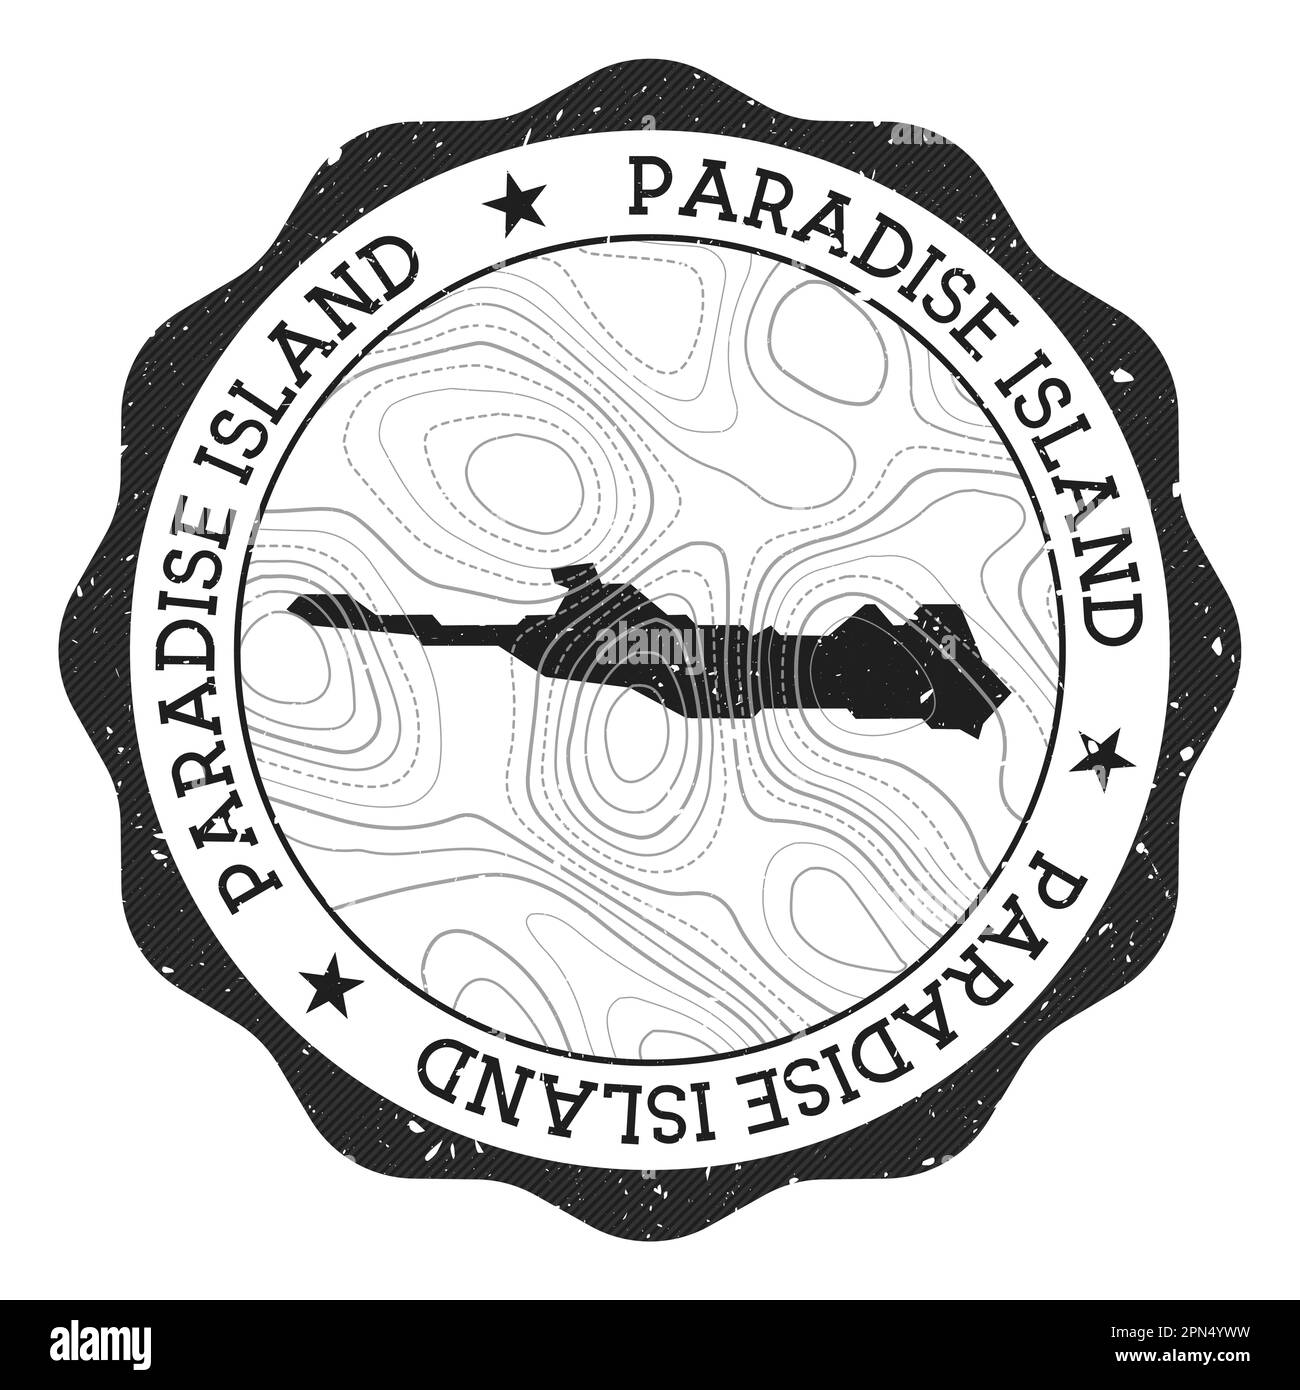 Paradise Island outdoor stamp. Round sticker with map with topographic isolines. Vector illustration. Can be used as insignia, logotype, label, sticke Stock Vector